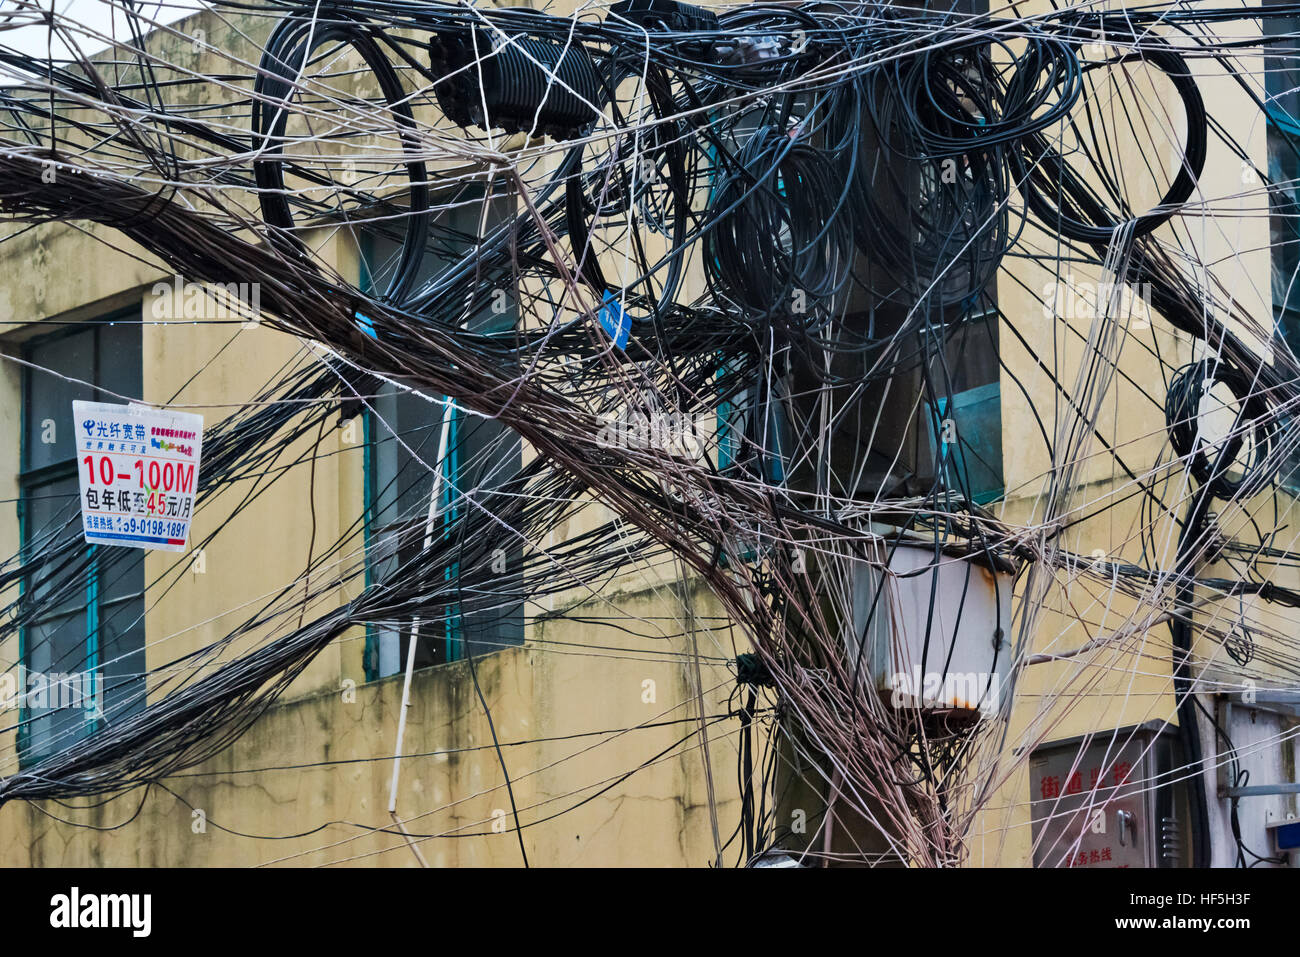 Messy wires in the old residential area, Shanghai, China Stock Photo